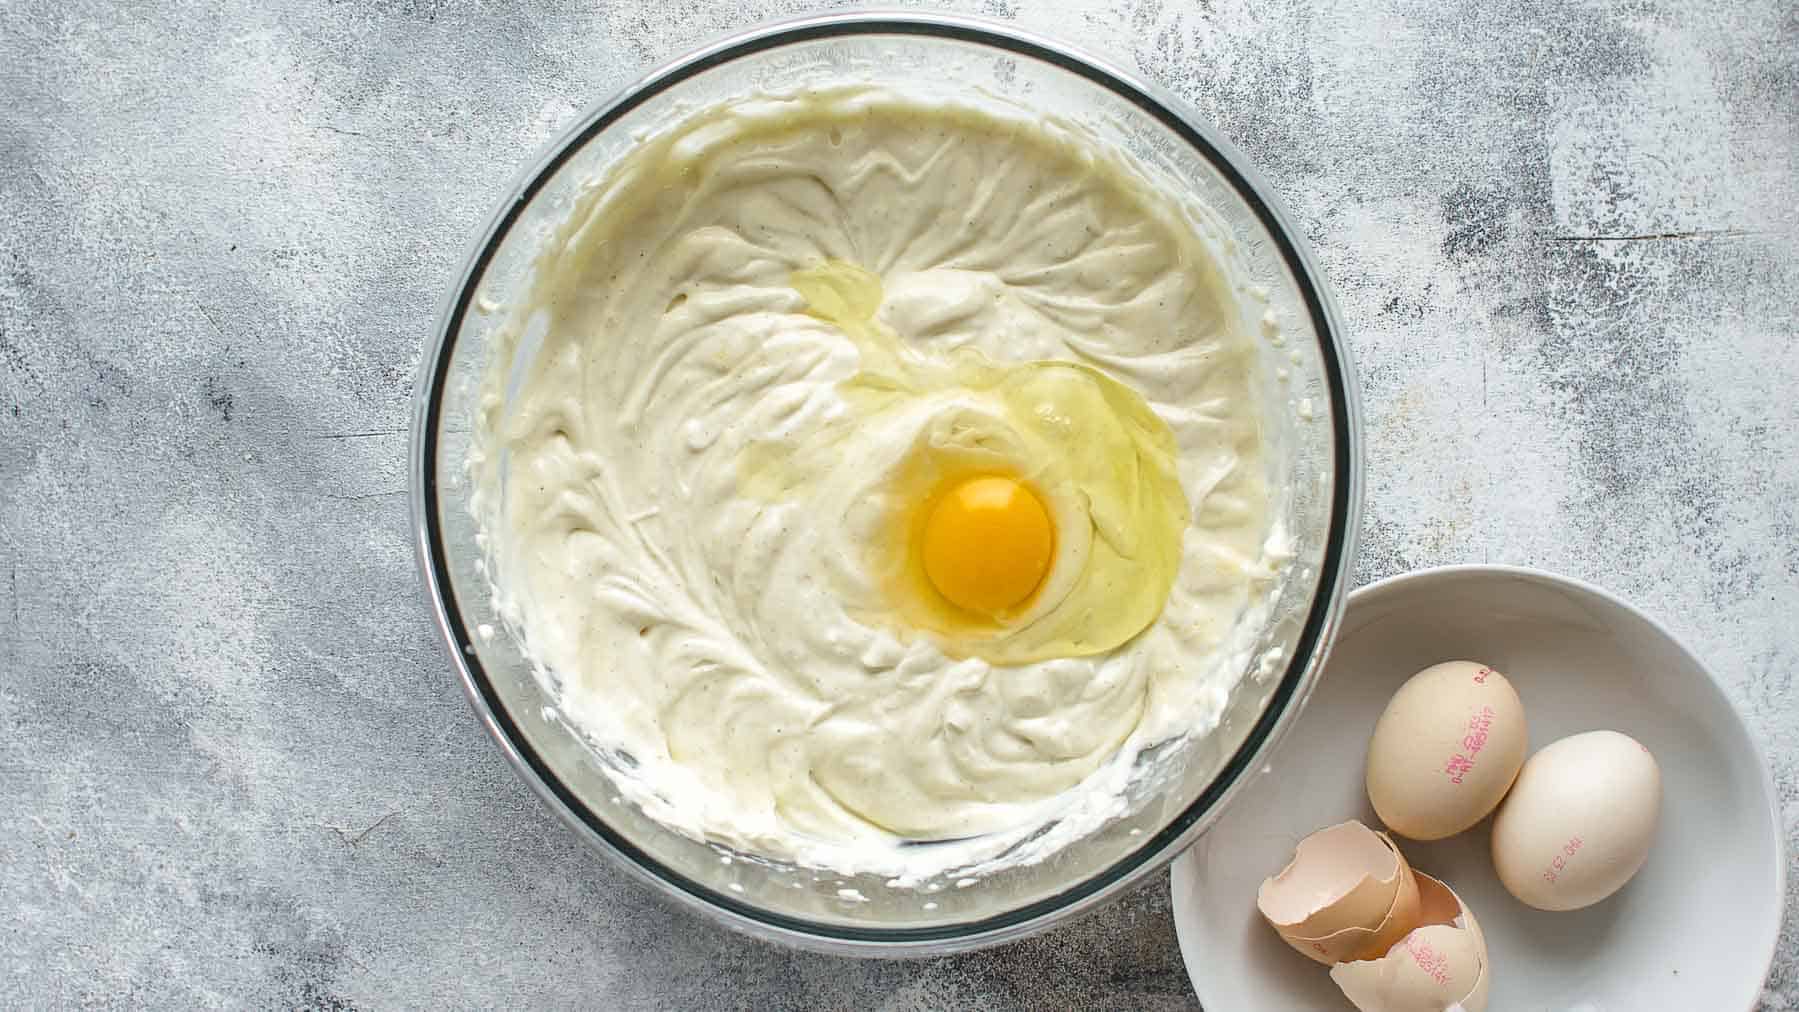 Adding the second egg to the coconut cheesecake batter